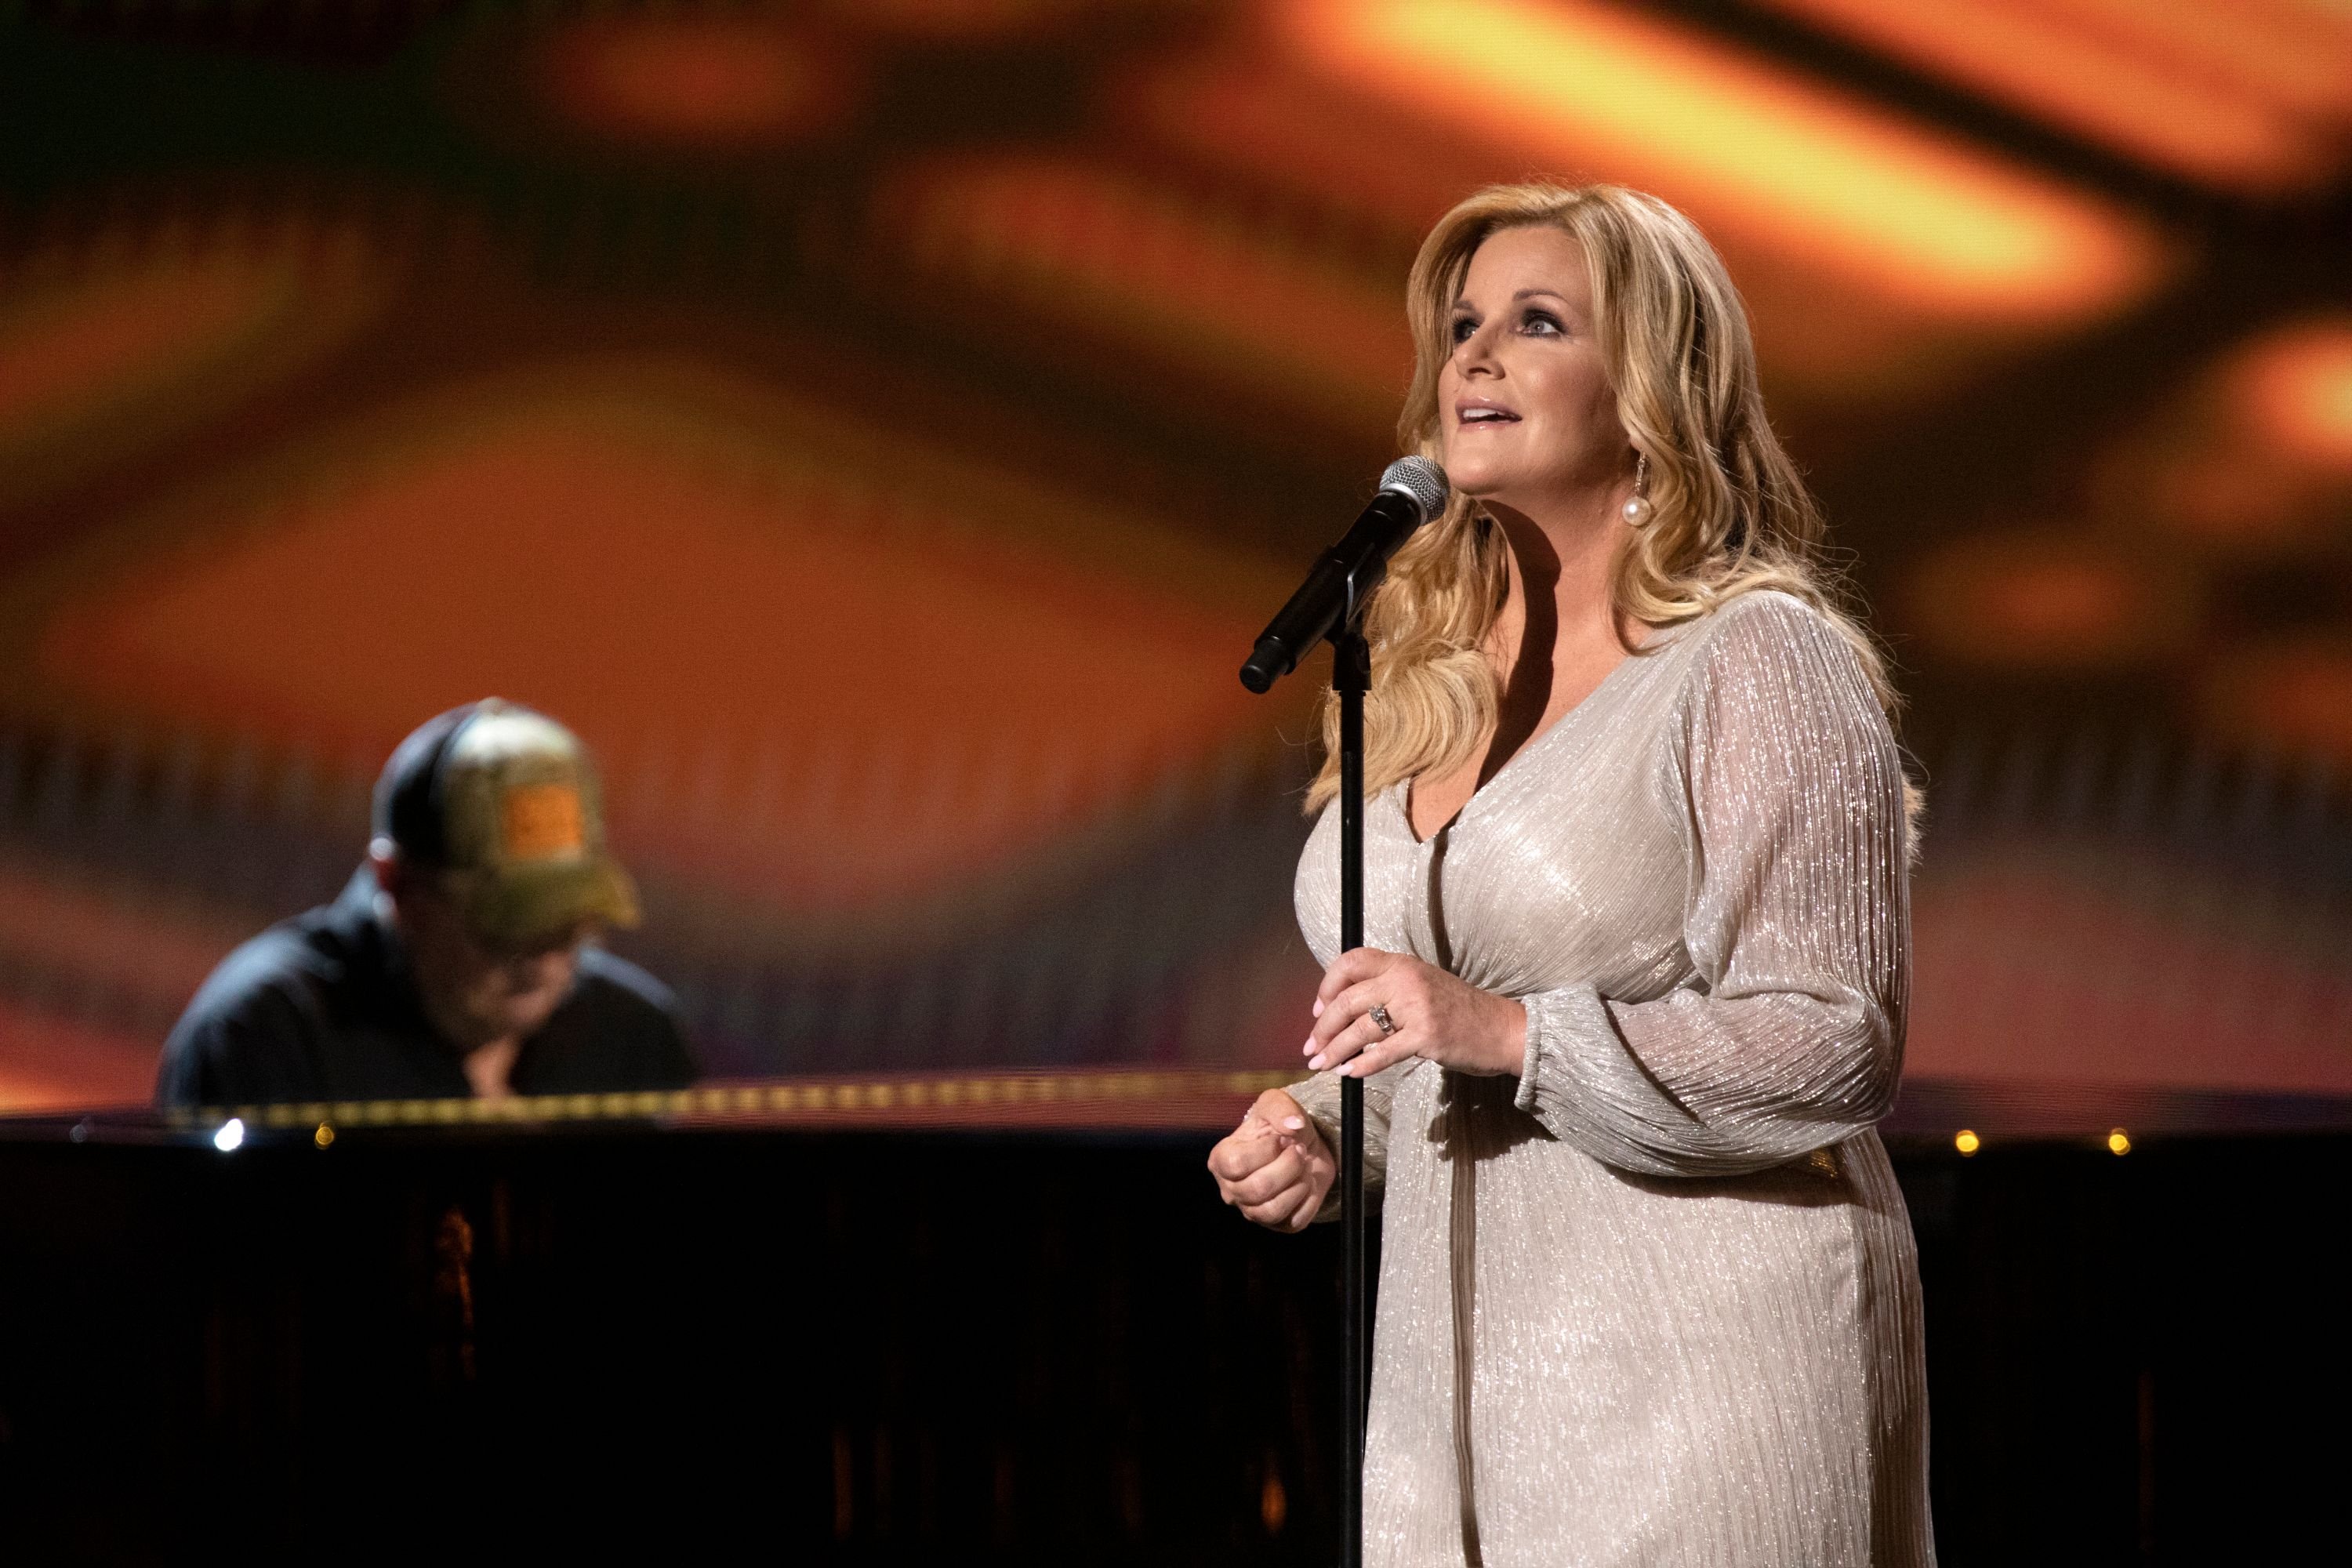 Trisha Yearwood at the 55th Academy of Country Music Awards in 2020 in Nashville, Tennessee | Source: Getty Images